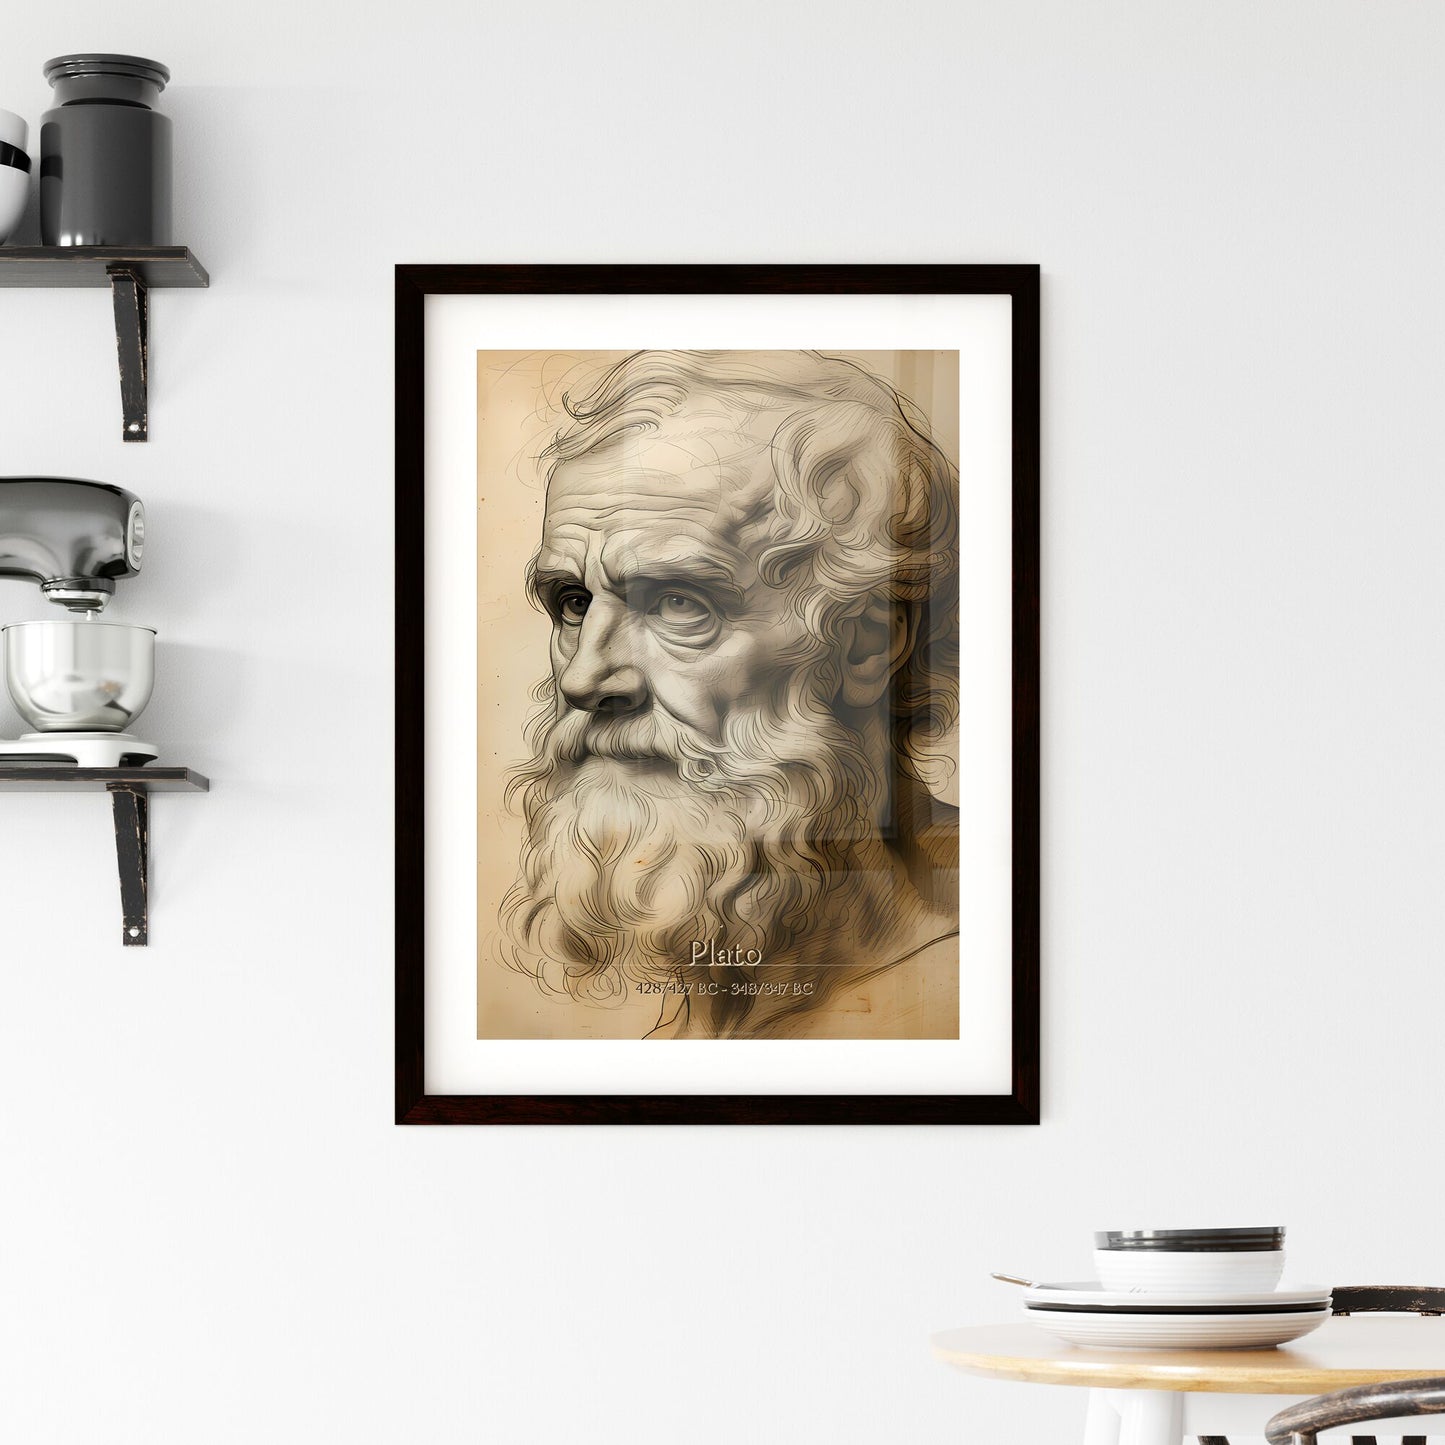 Plato, 428/427 BC - 348/347 BC, A Poster of a drawing of a man with a beard Default Title